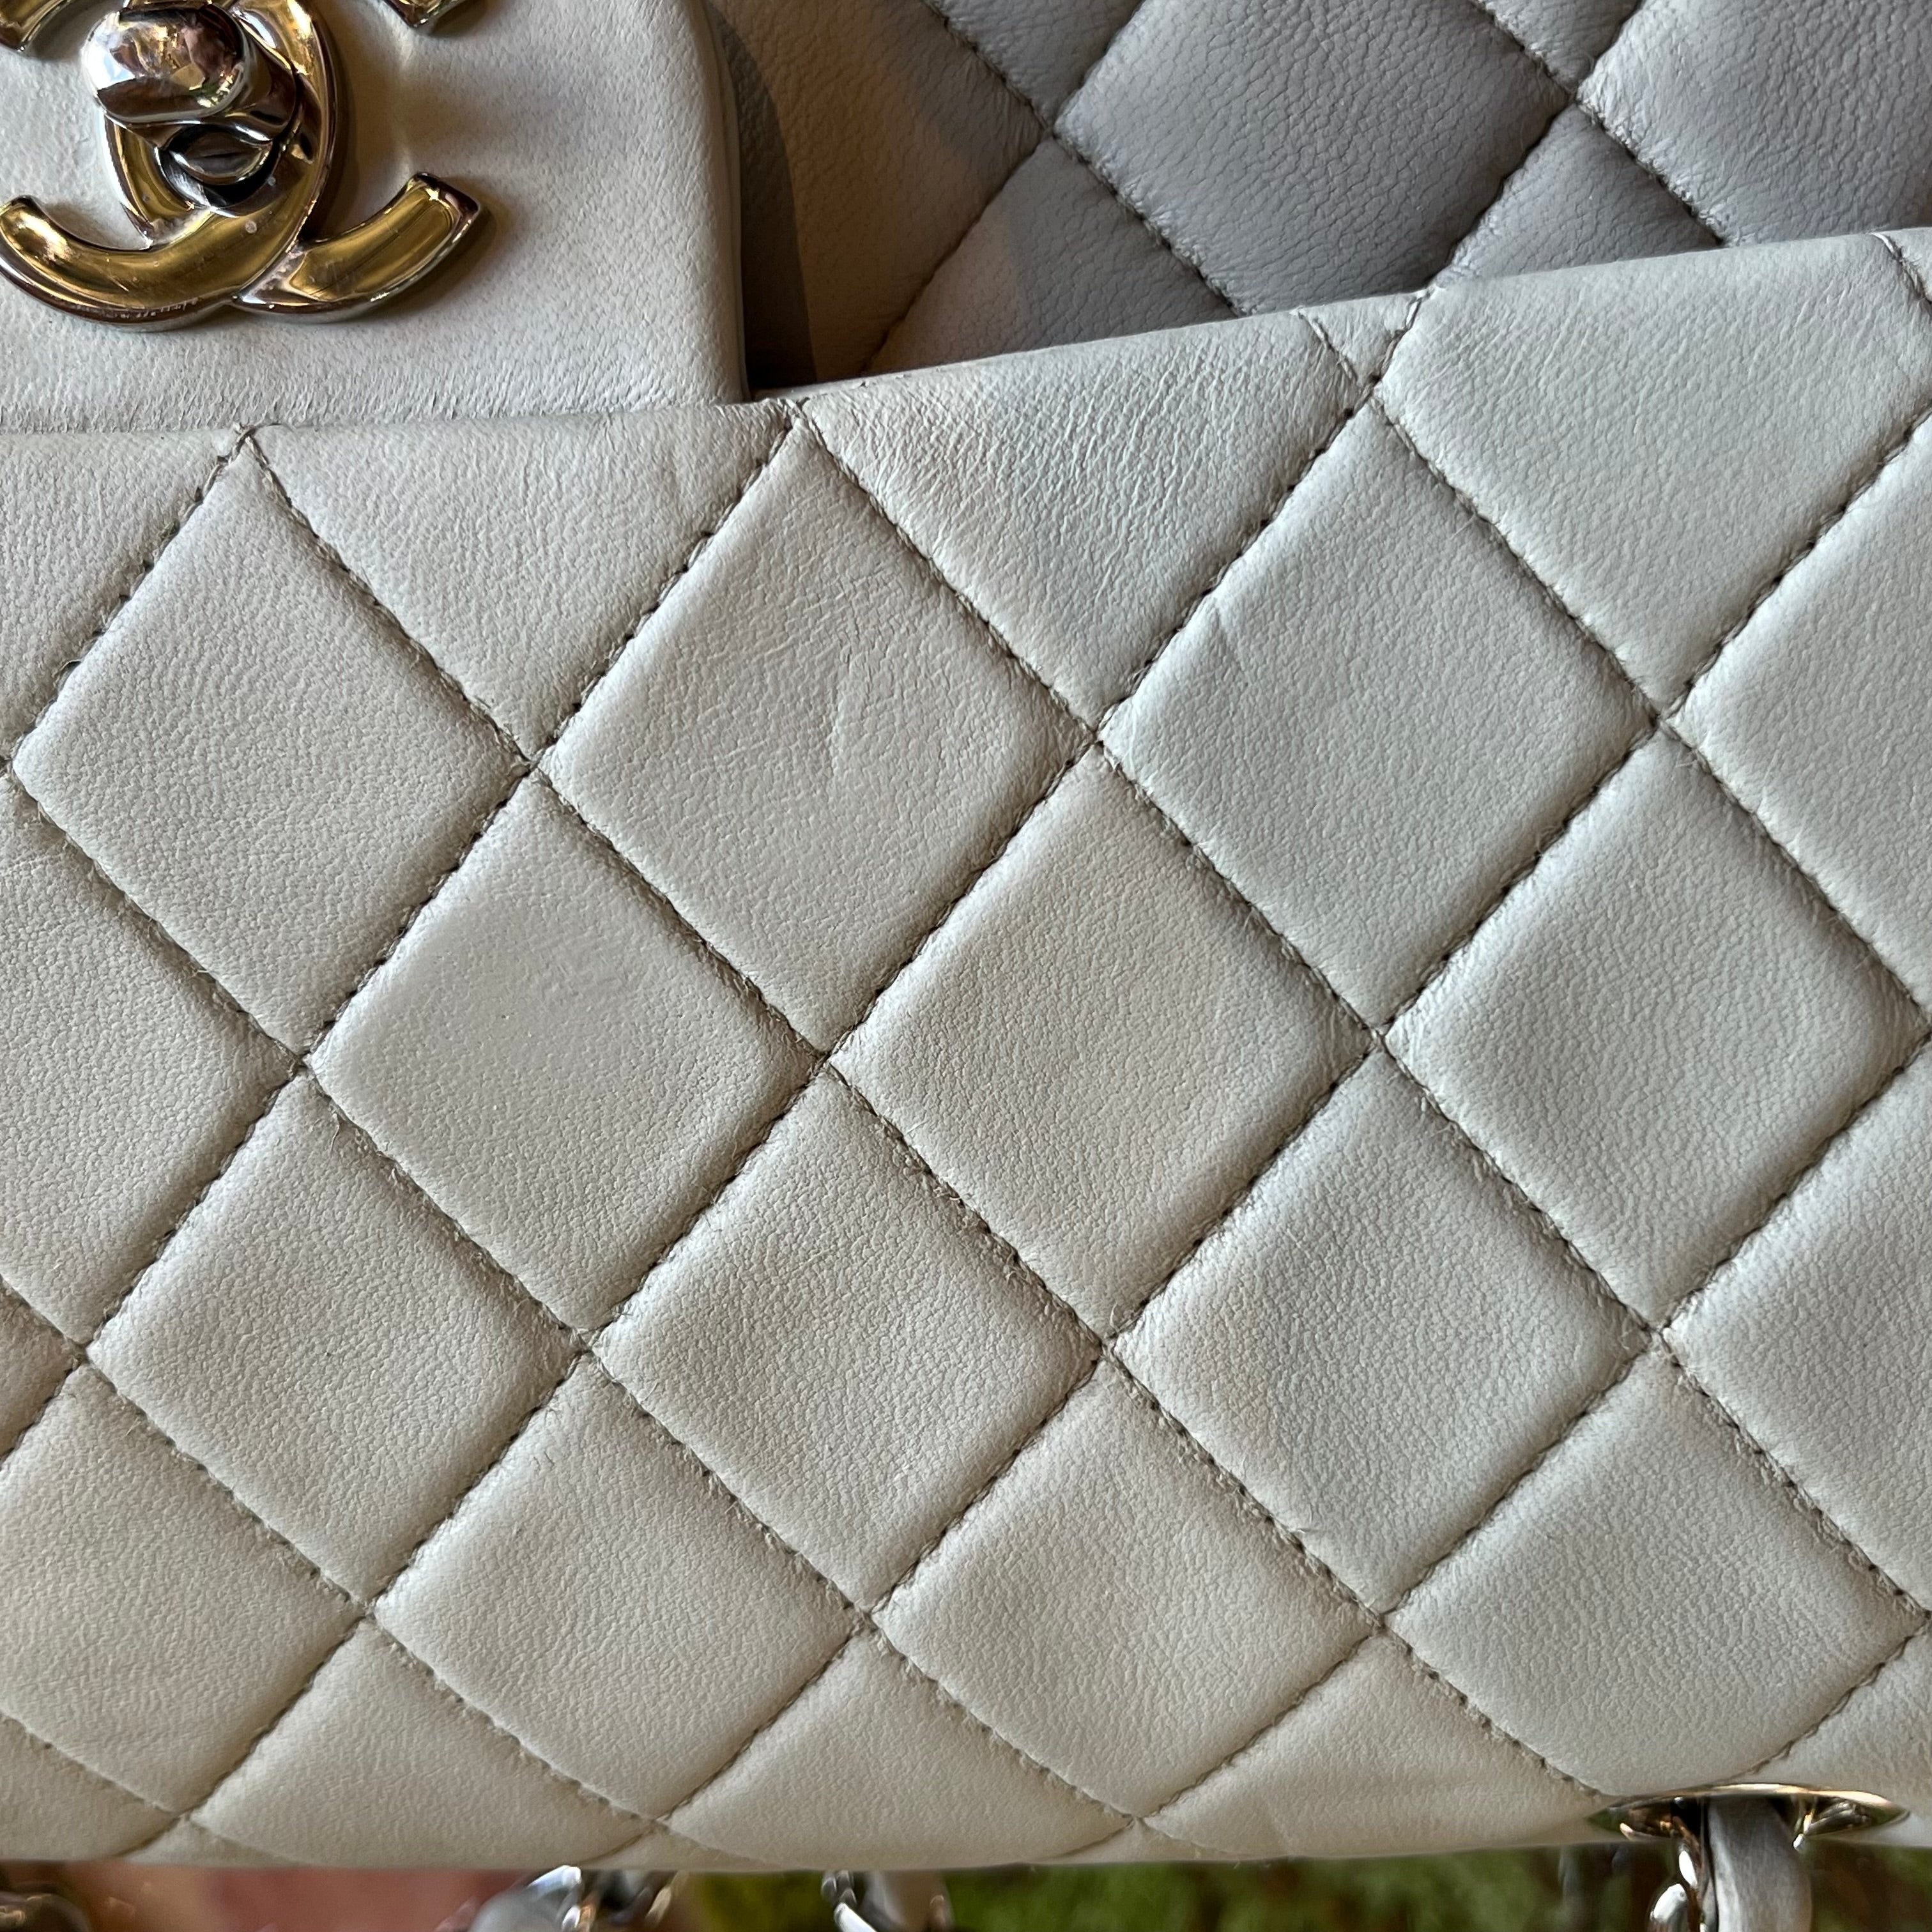 CHANEL Gray Quilted Lambskin Leather Vintage Medium Classic Double Fla -  The Purse Ladies